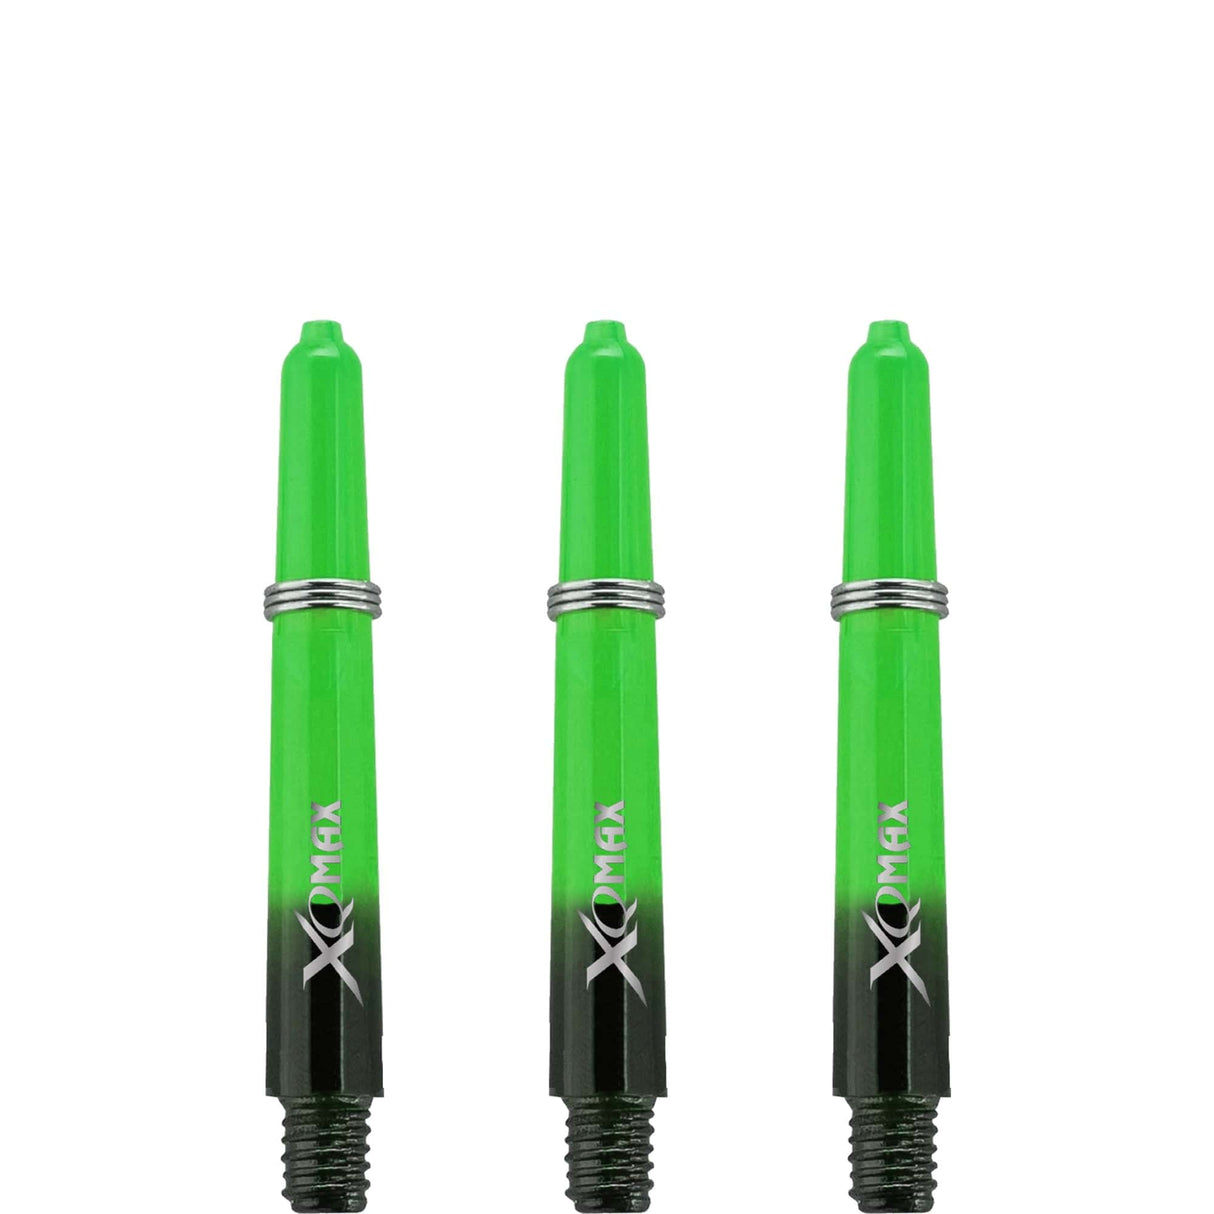 XQMax Gradient Polycarbonate Dart Shafts - with Logo - includes Springs - Black & Green Short